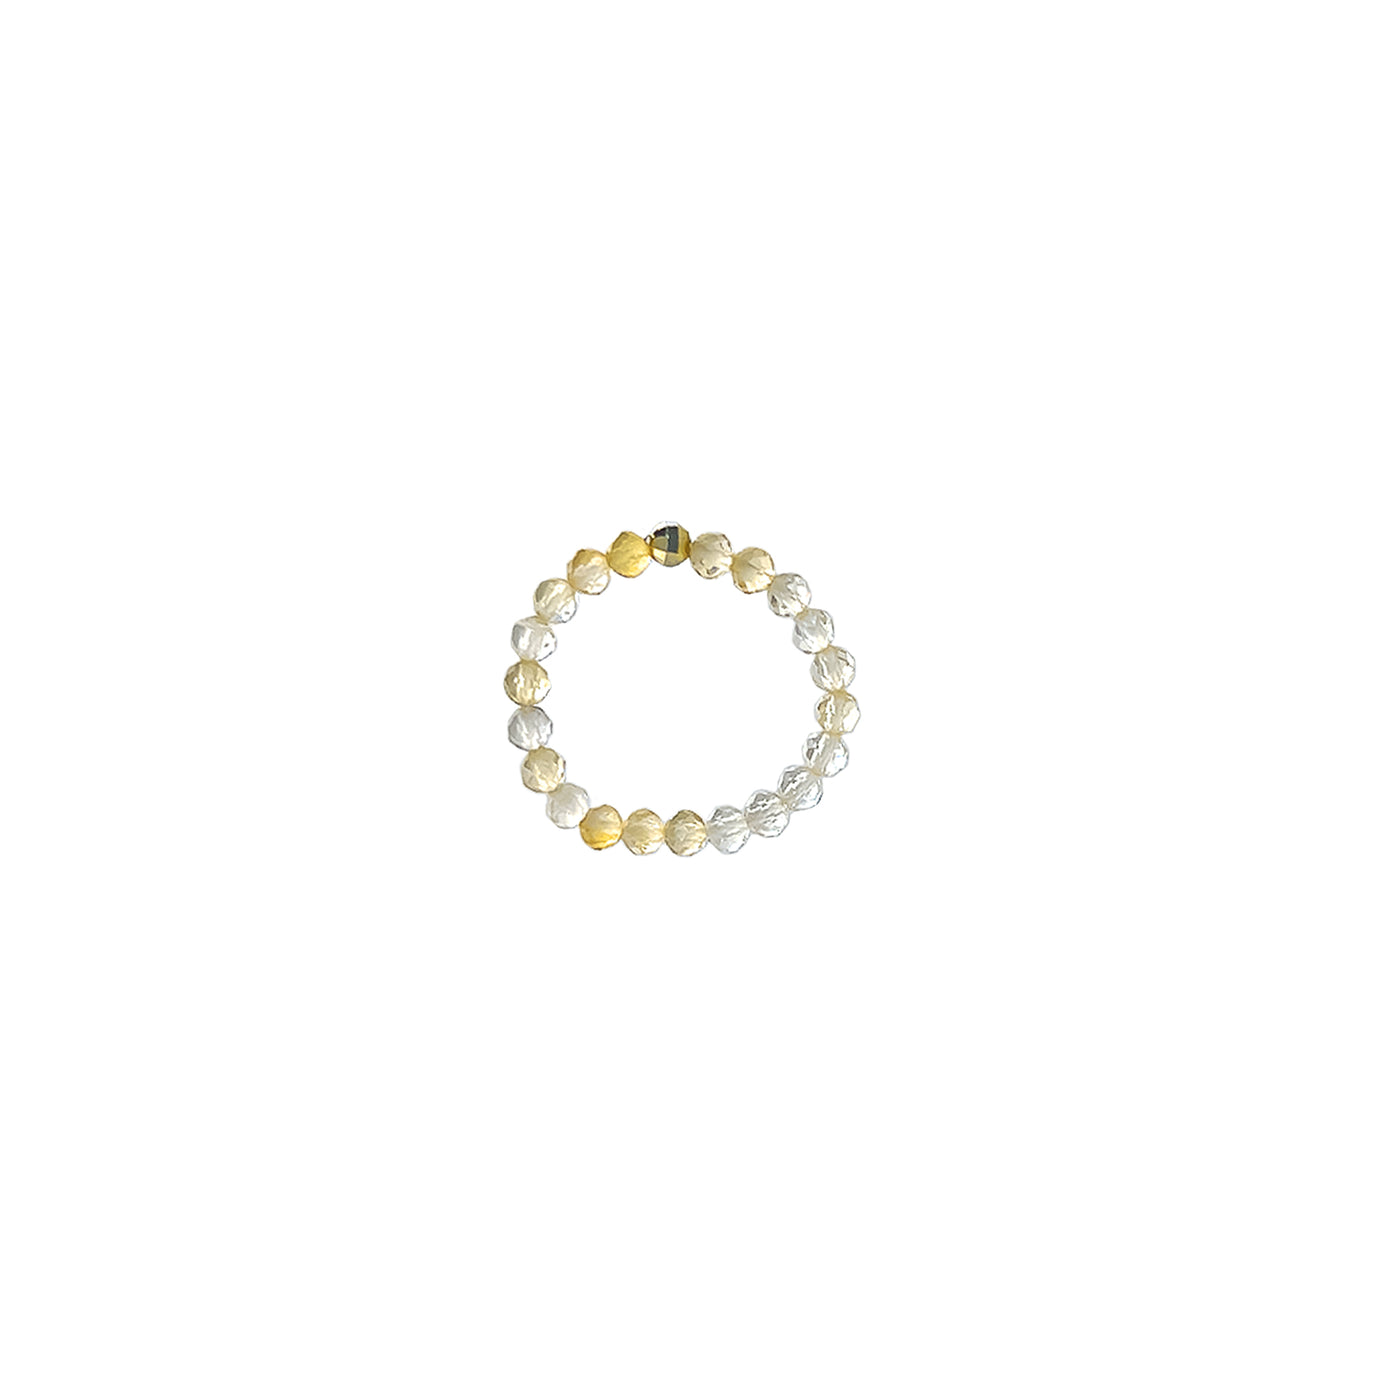 NOVEMBER Birthstone: Citrine Women's Delicate Faceted Stretch Ring